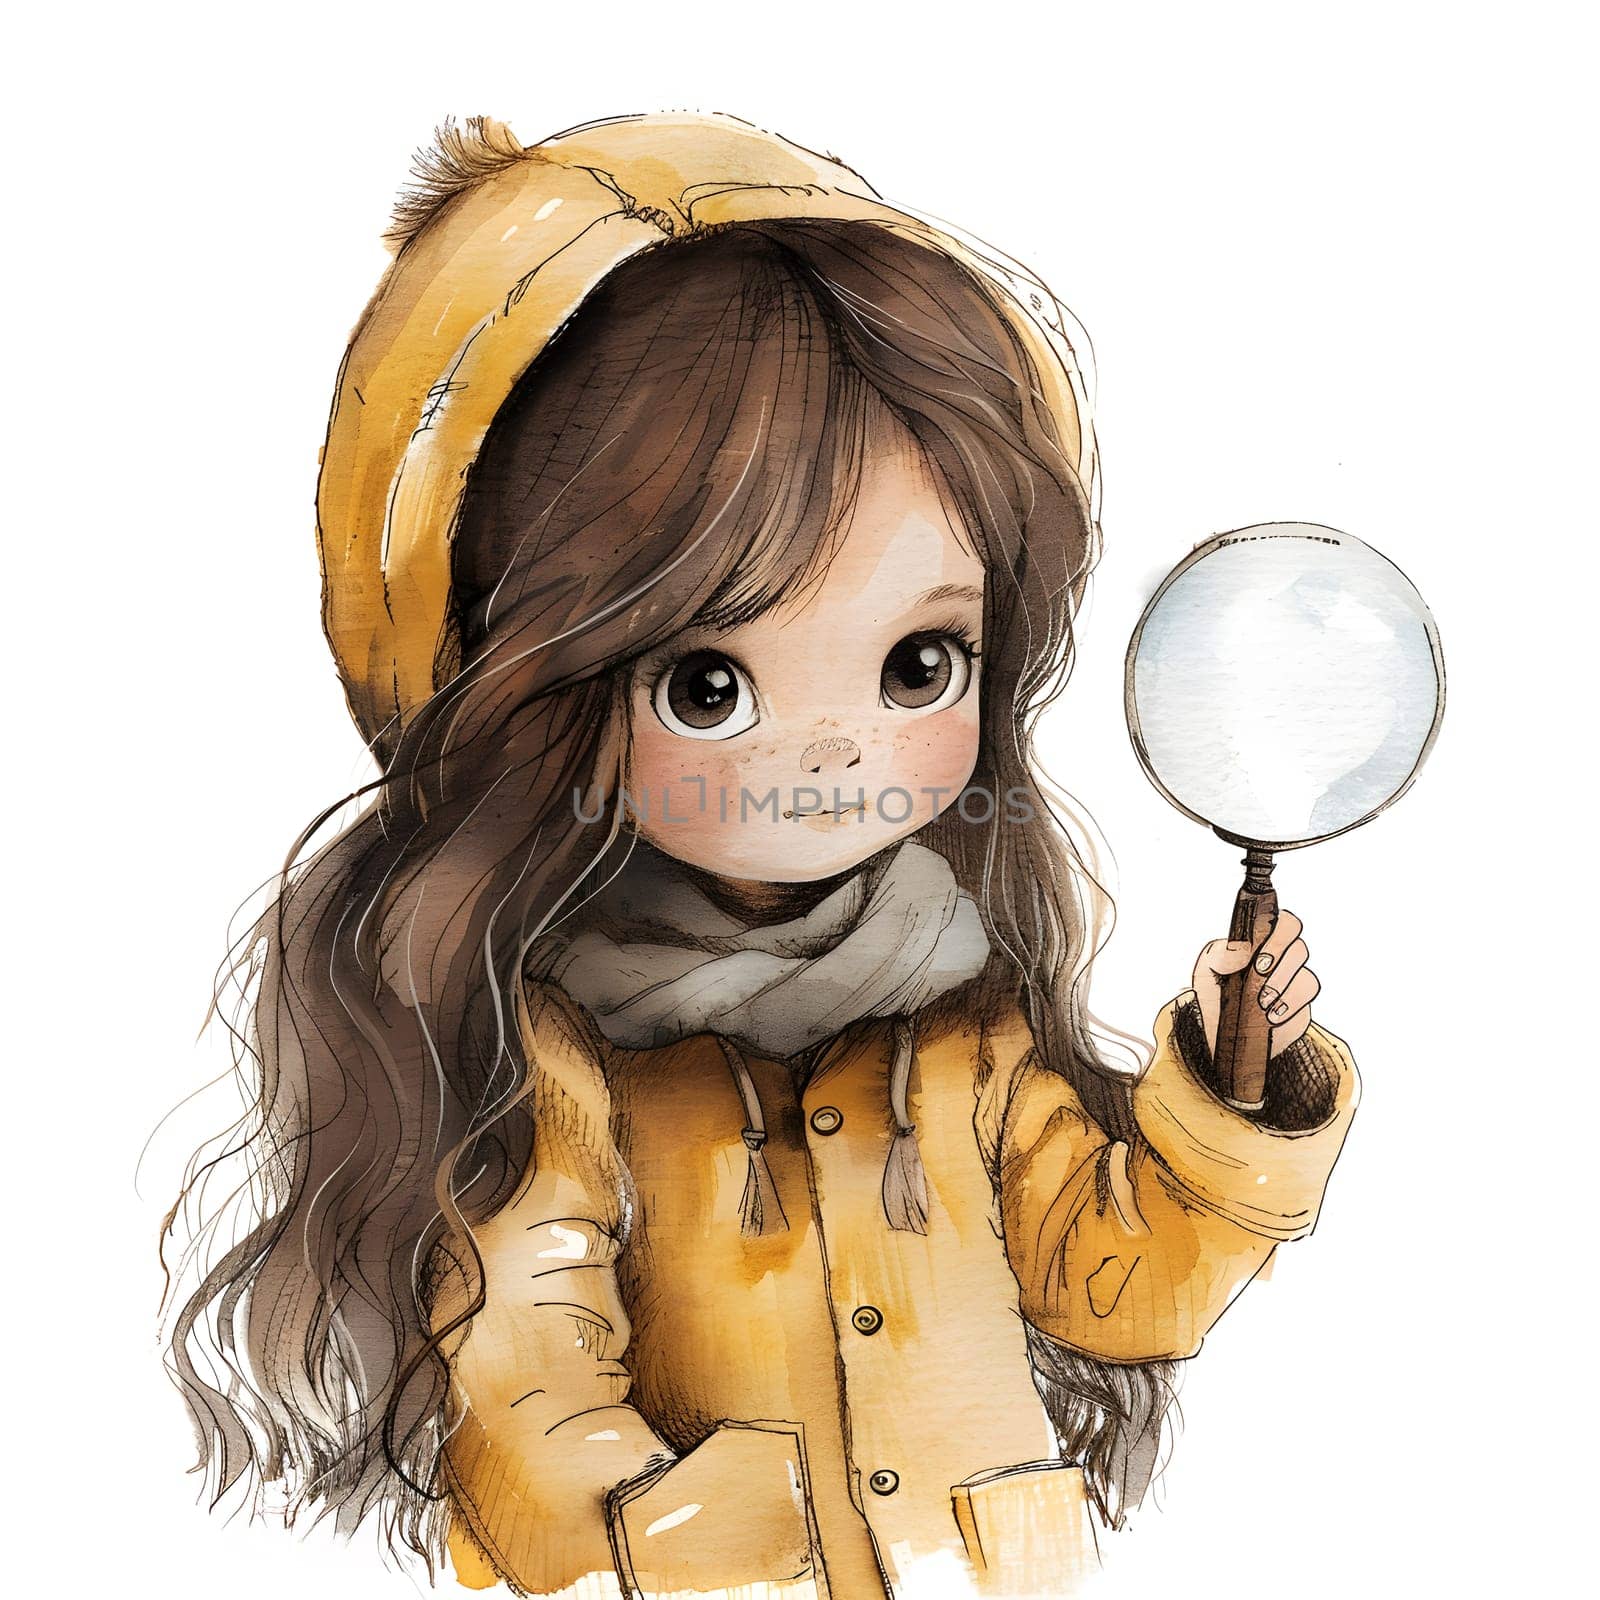 Cartoon girl happily holding magnifying glass as fashion accessory in her hand by Nadtochiy